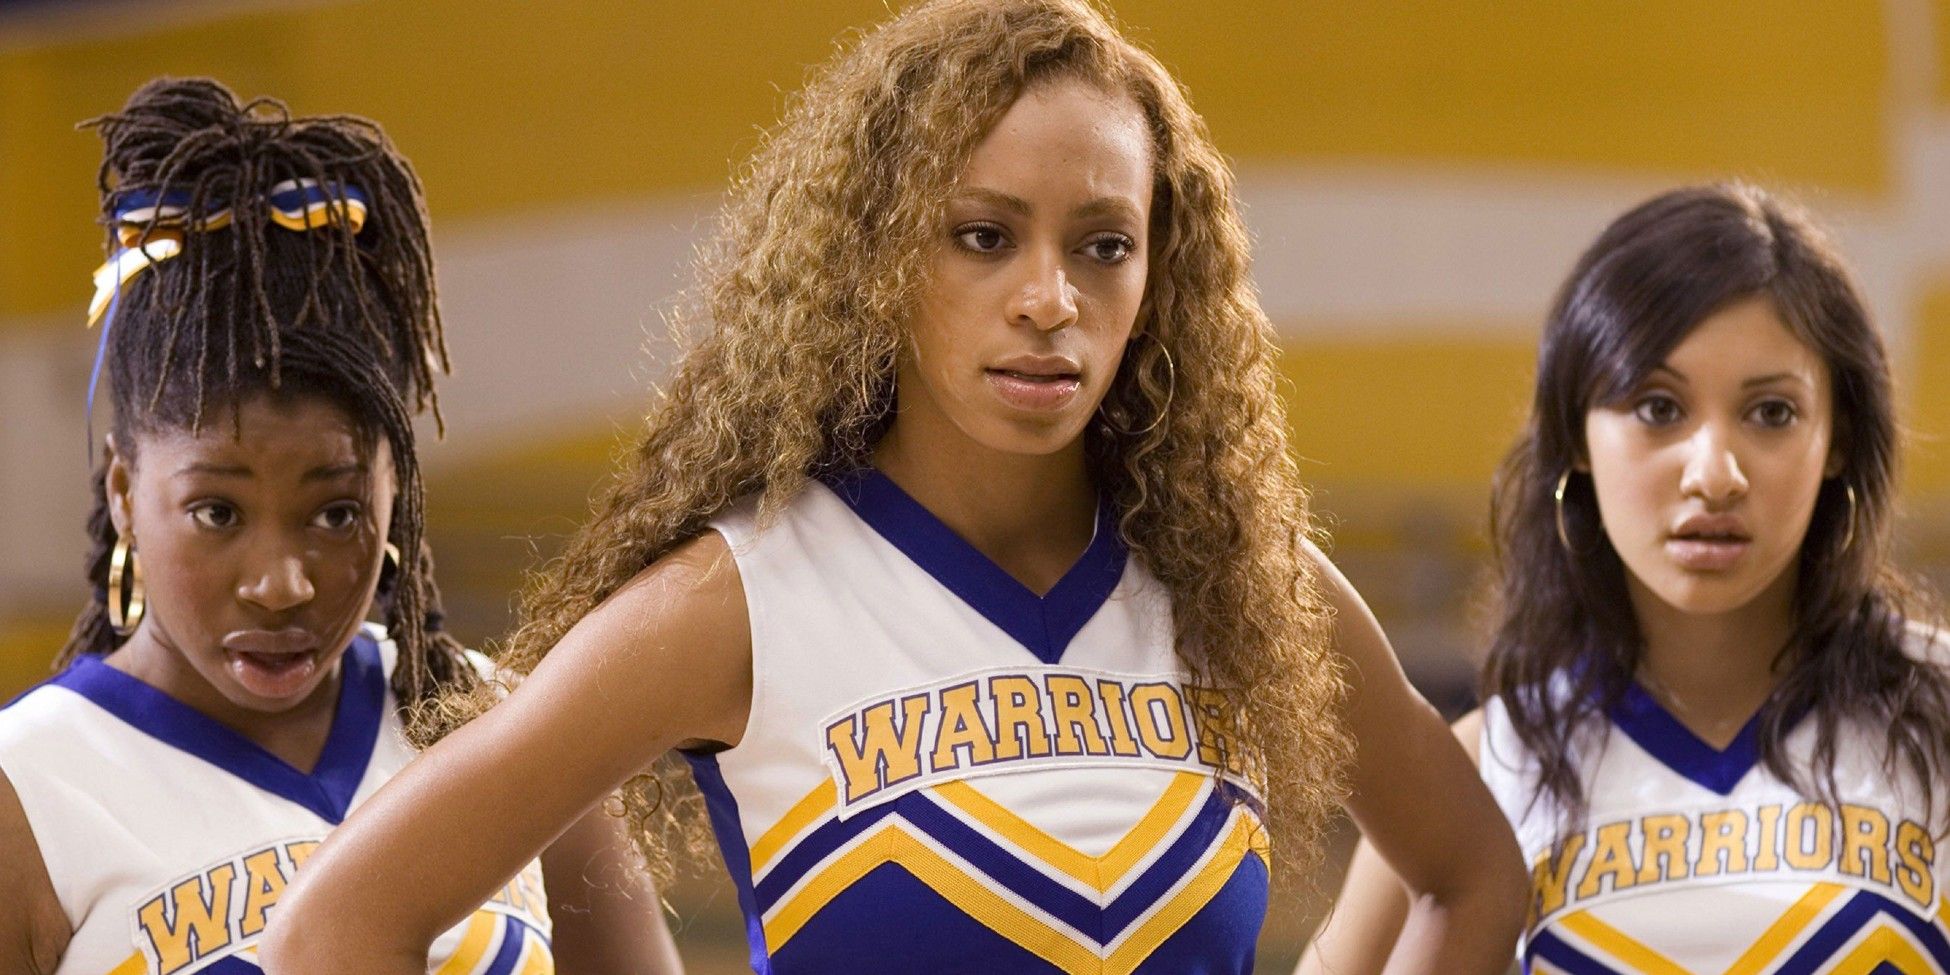 Giovonnie Samuels, Solange Knowles and Francia Raisa in Bring It On All Or Nothing